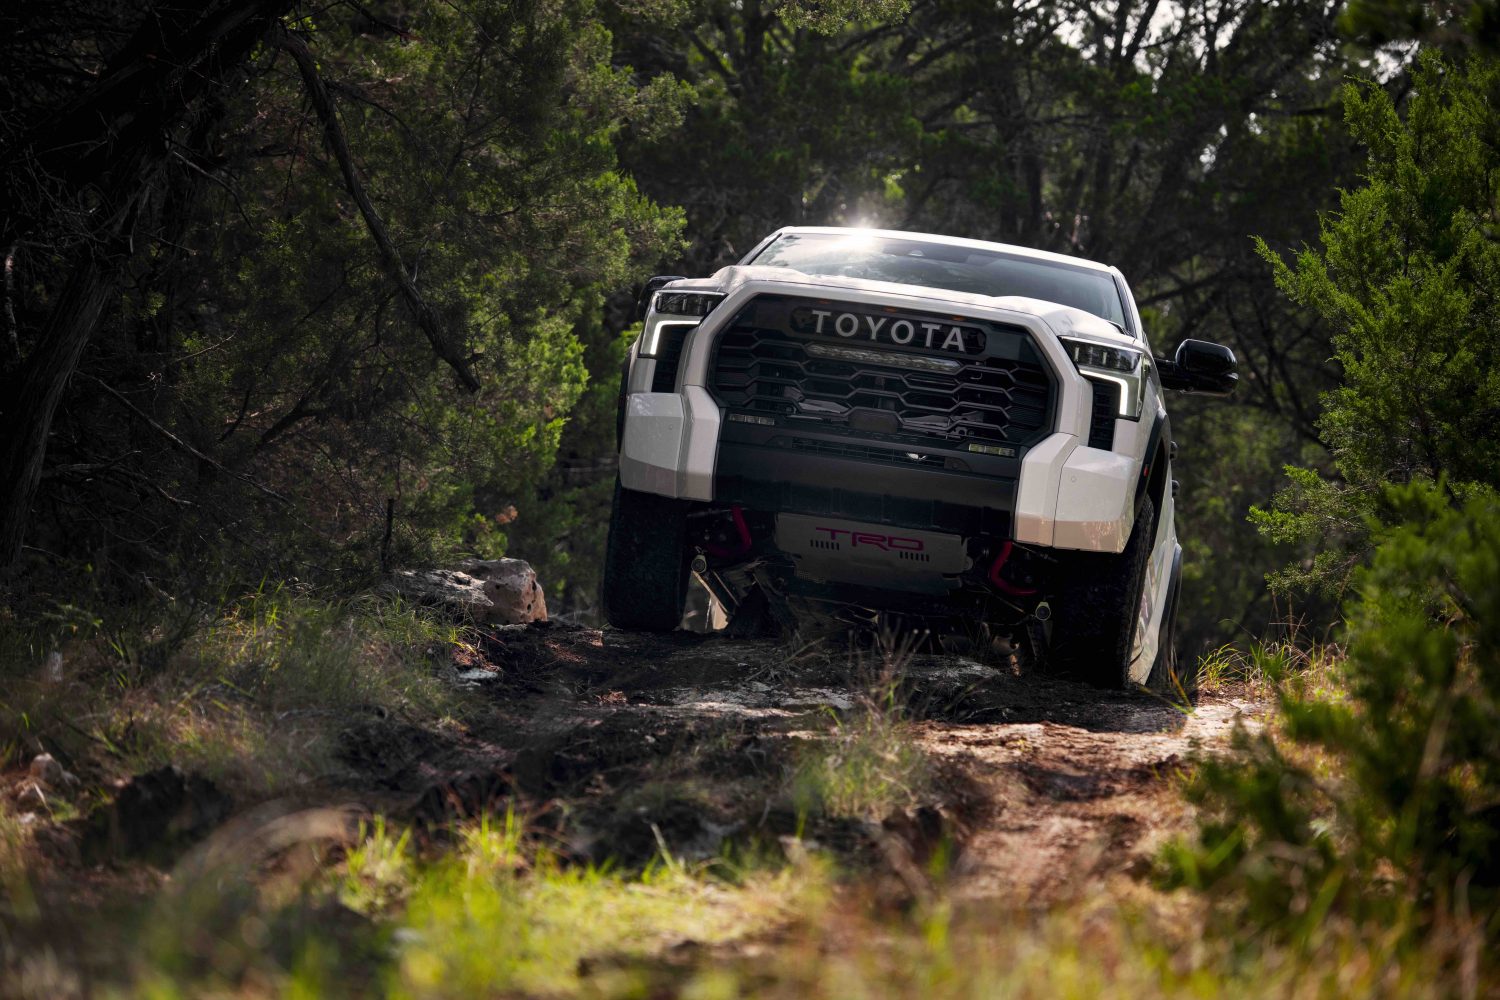 A white 2022 Toyota Tundra TRD Pro pickup truck navigates an off-road 4x4 trail, trees in the background.